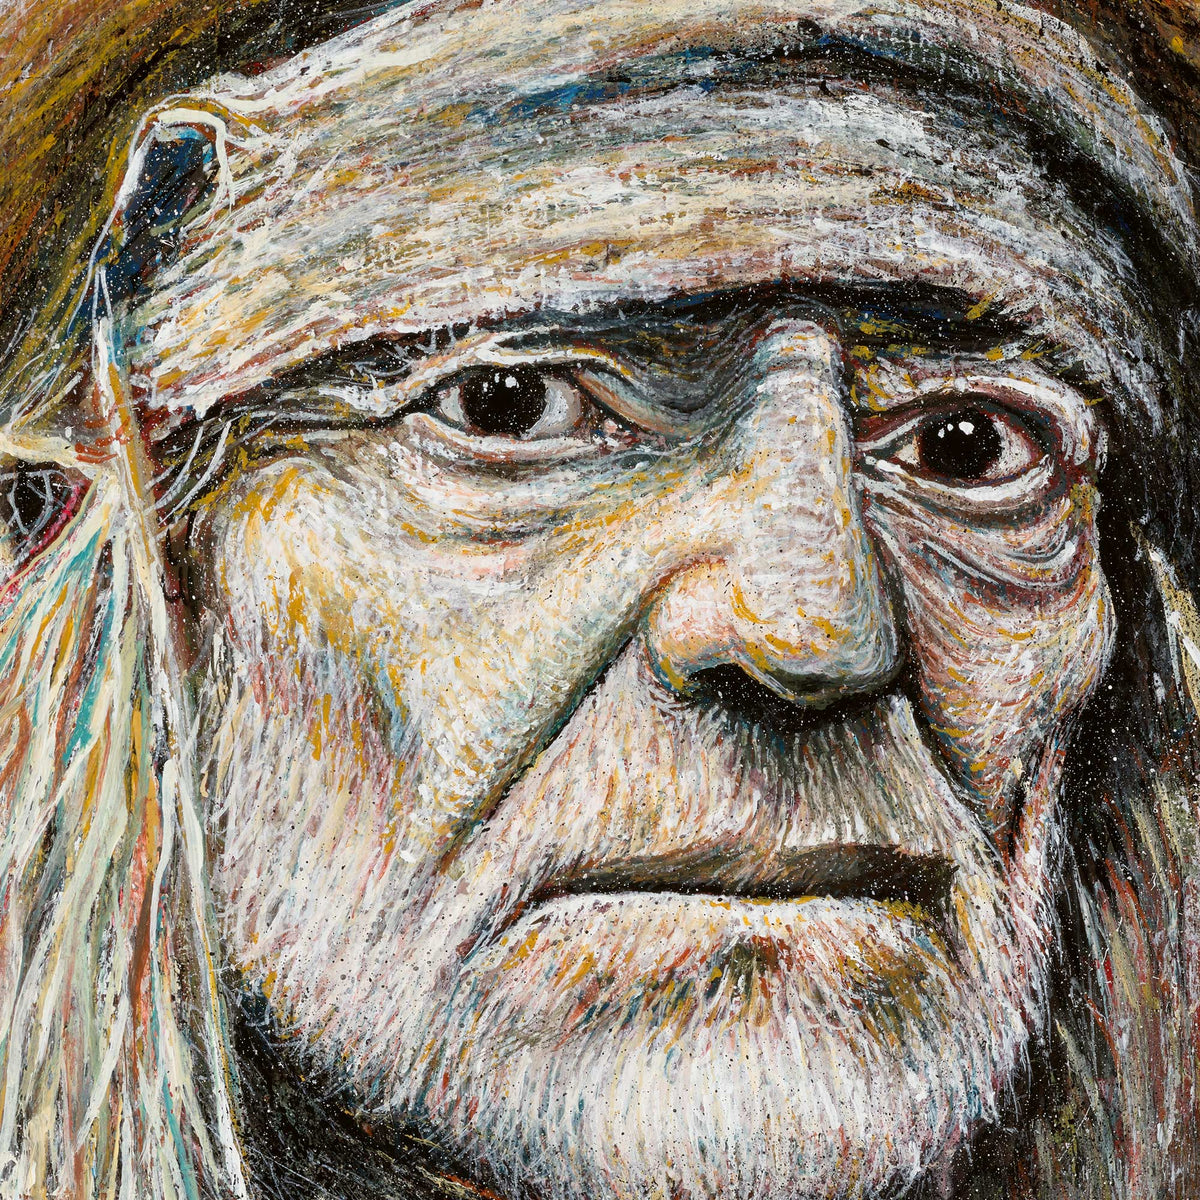 willie nelson - limited edition prints